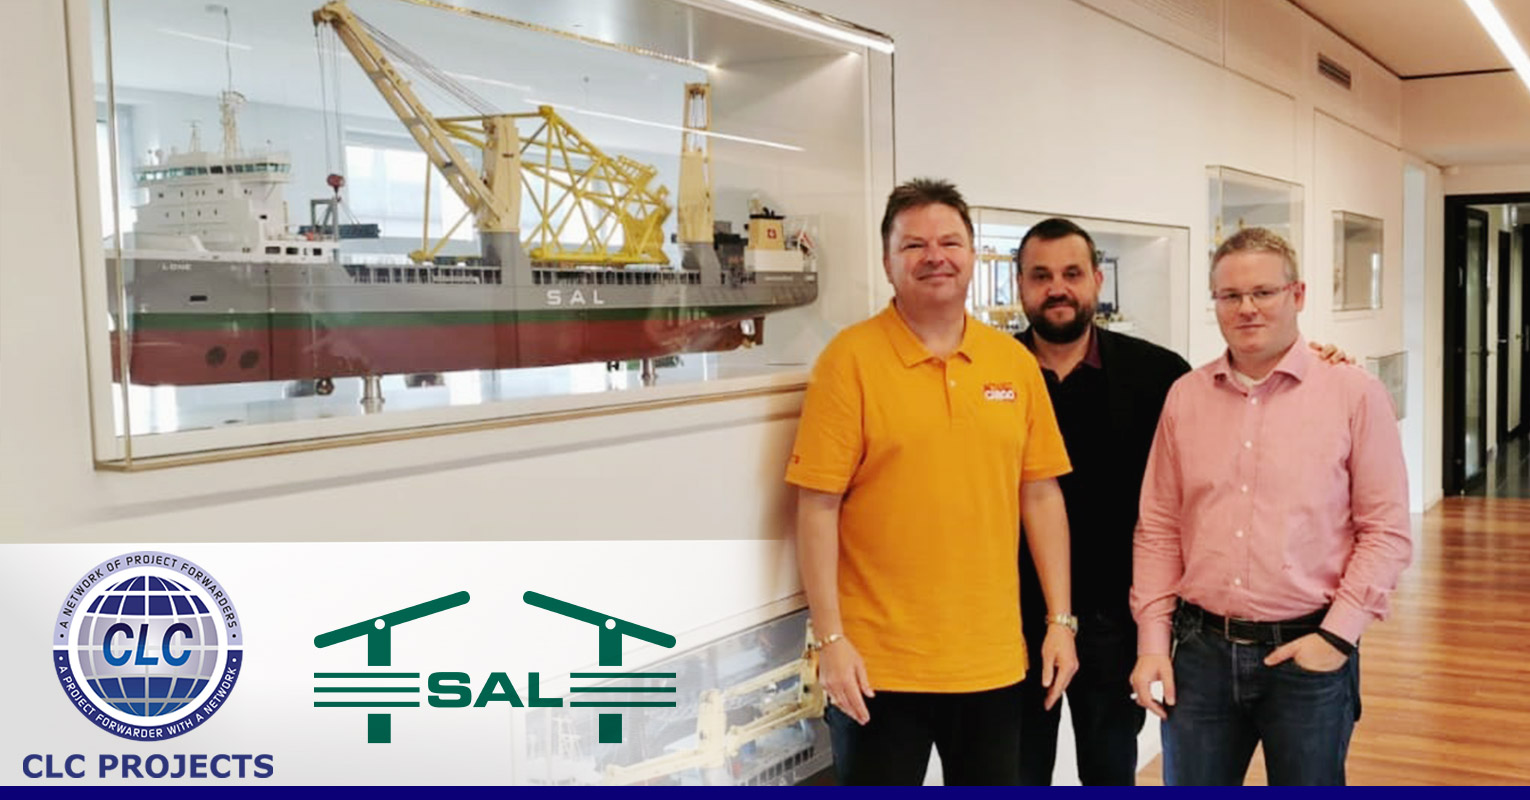 CLC Projects and SAL at their Head Office in Hamburg